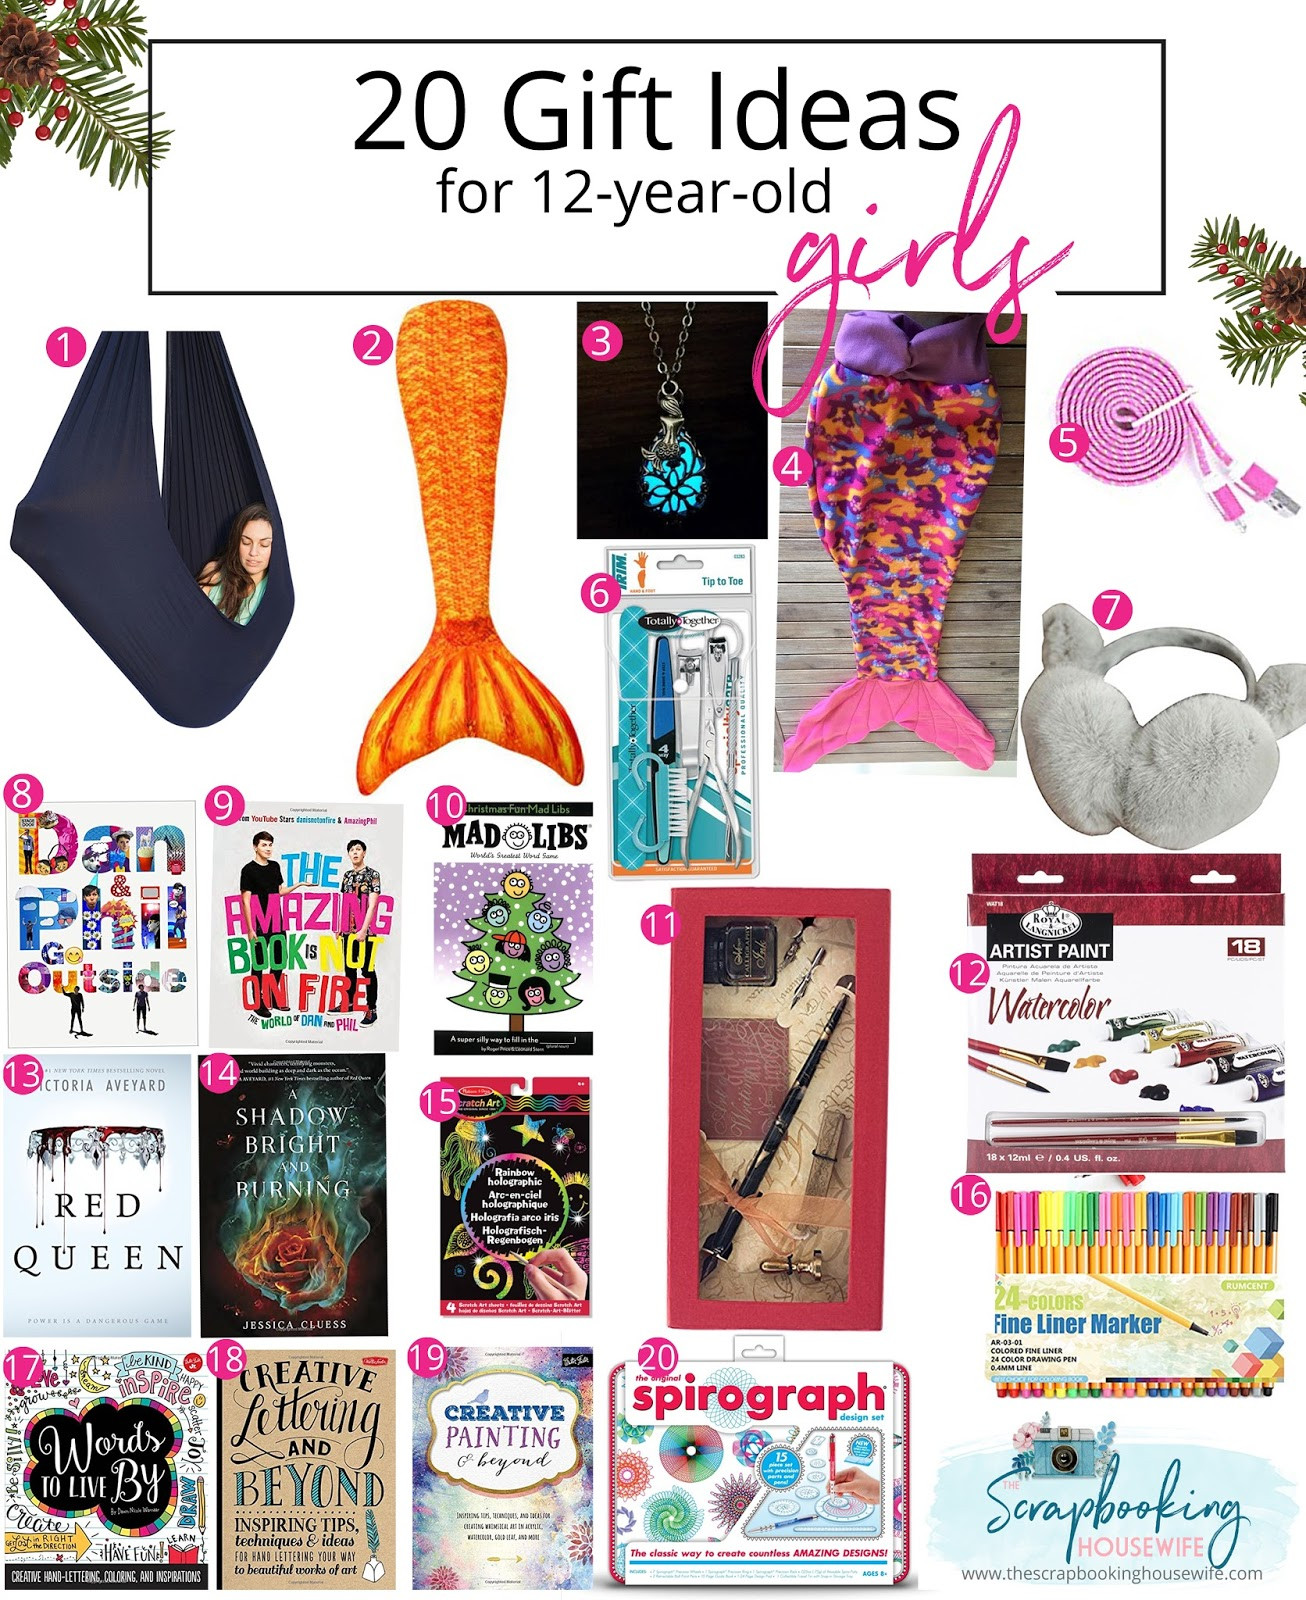 Gift Ideas for Girls 12 Lovely Ellabella Designs 20 Gift Ideas for 12 Year Old Tween